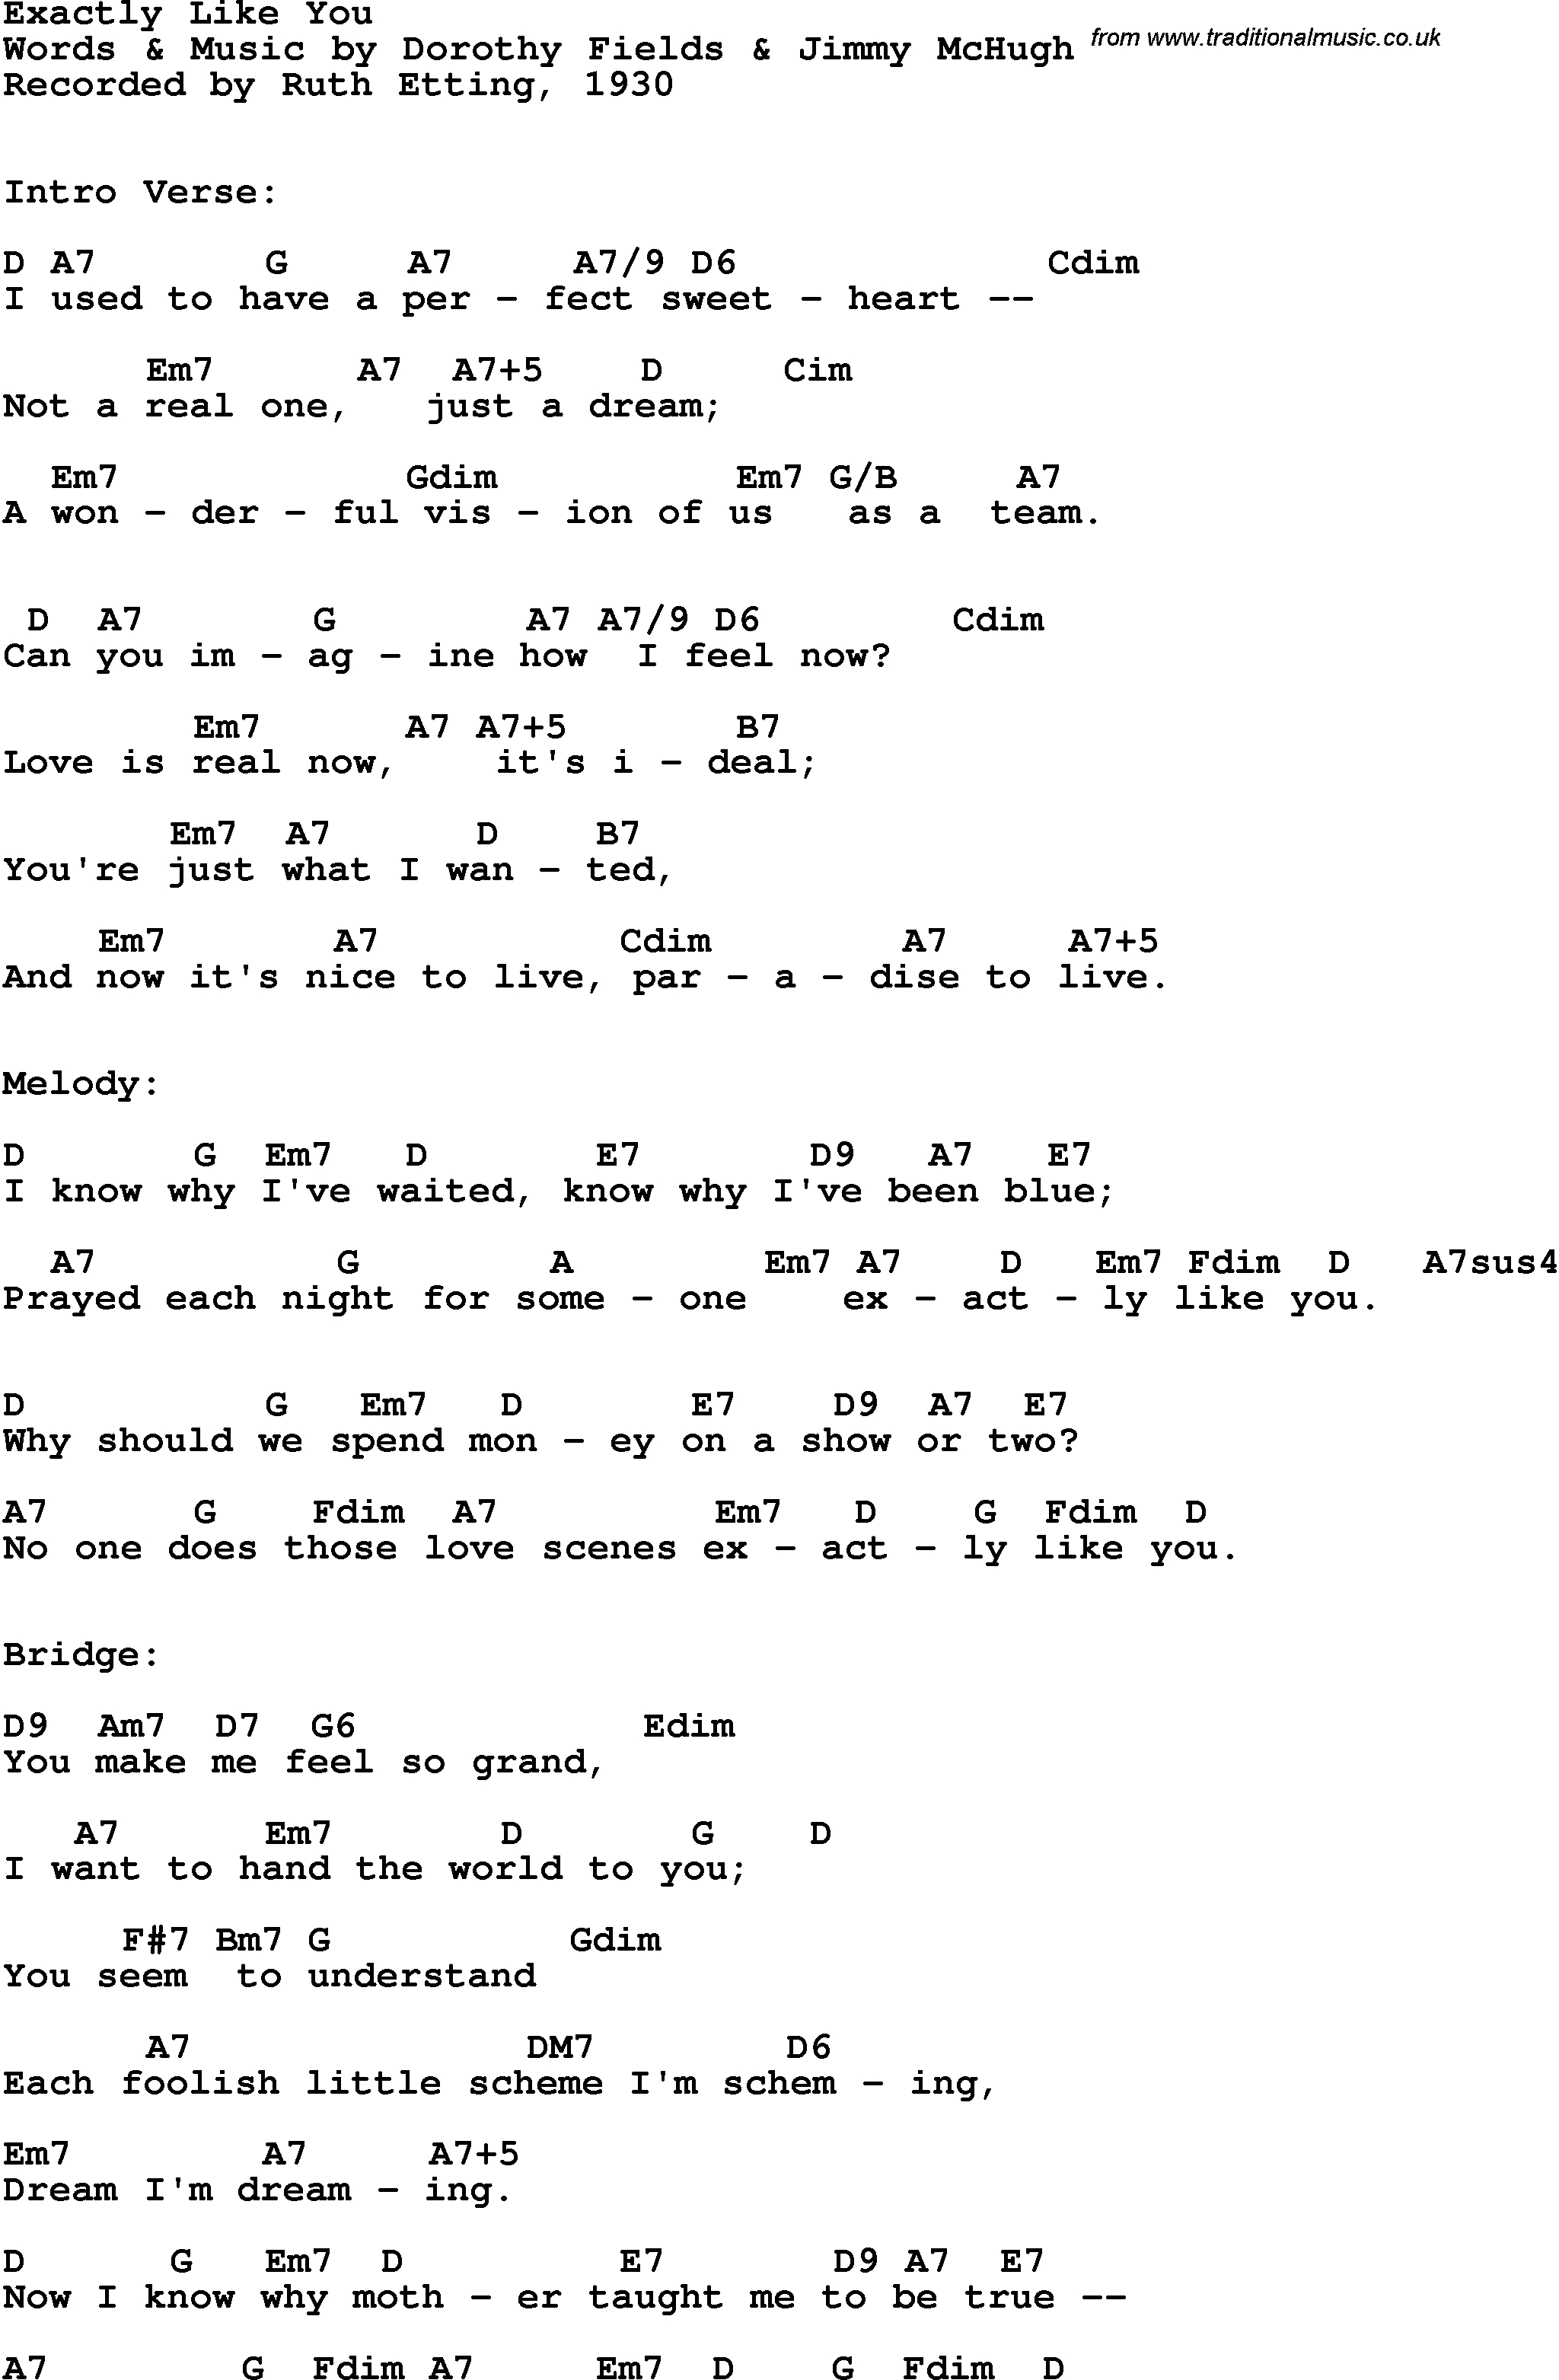 Someone Like You Chords Song Lyrics With Guitar Chords For Exactly Like You Ruth Etting 1930